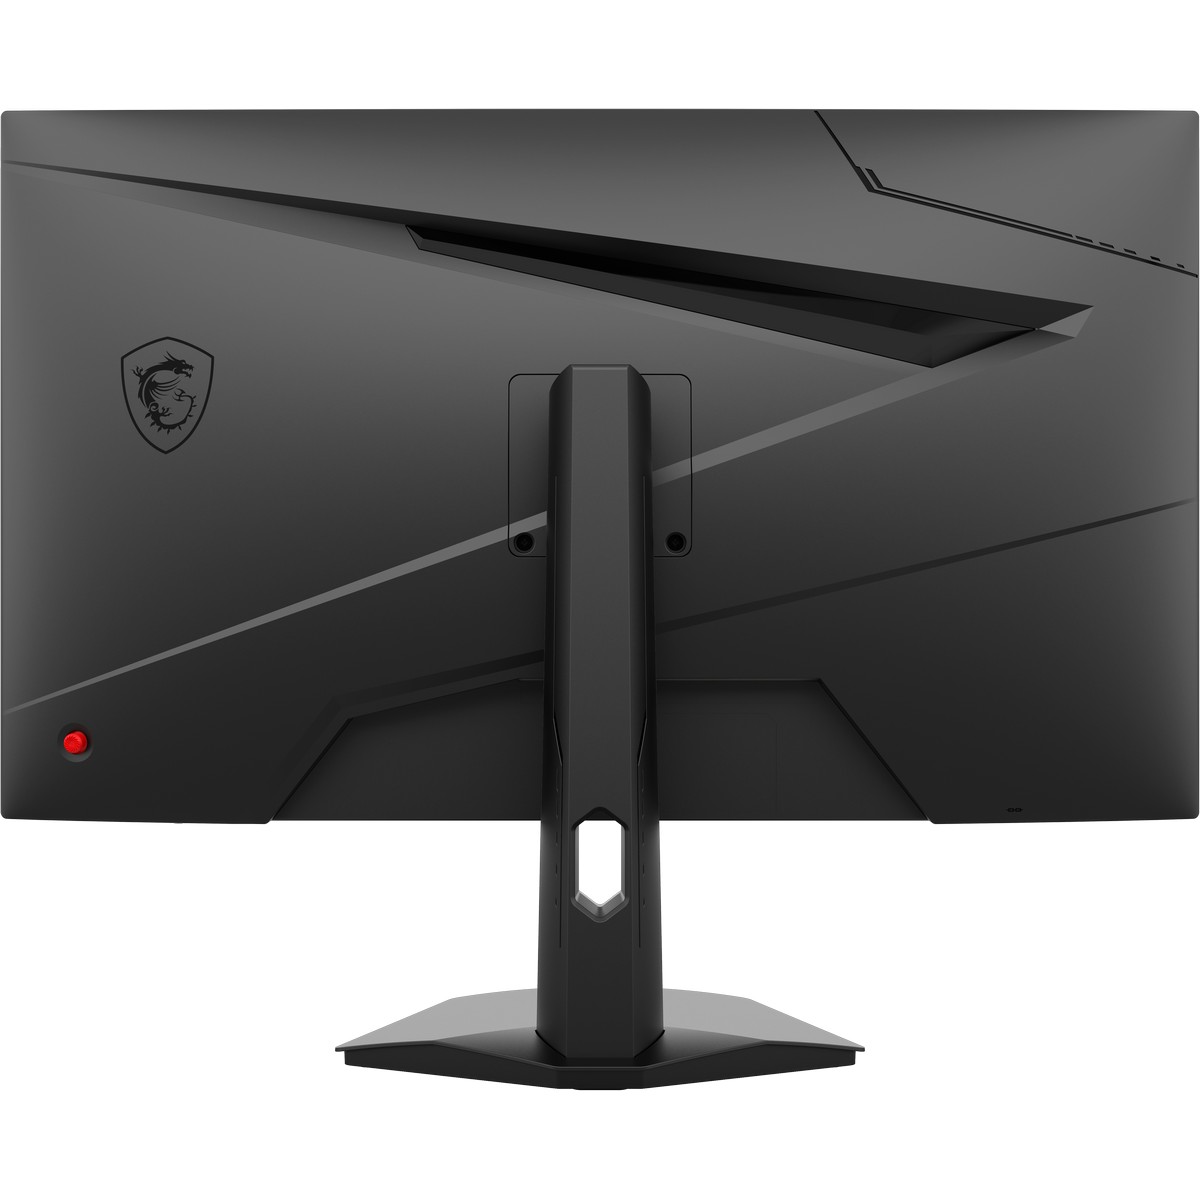 MSI - MSI 27" G274F 1920x1080 IPS 180Hz A-Sync Widescreen Gaming Monitor